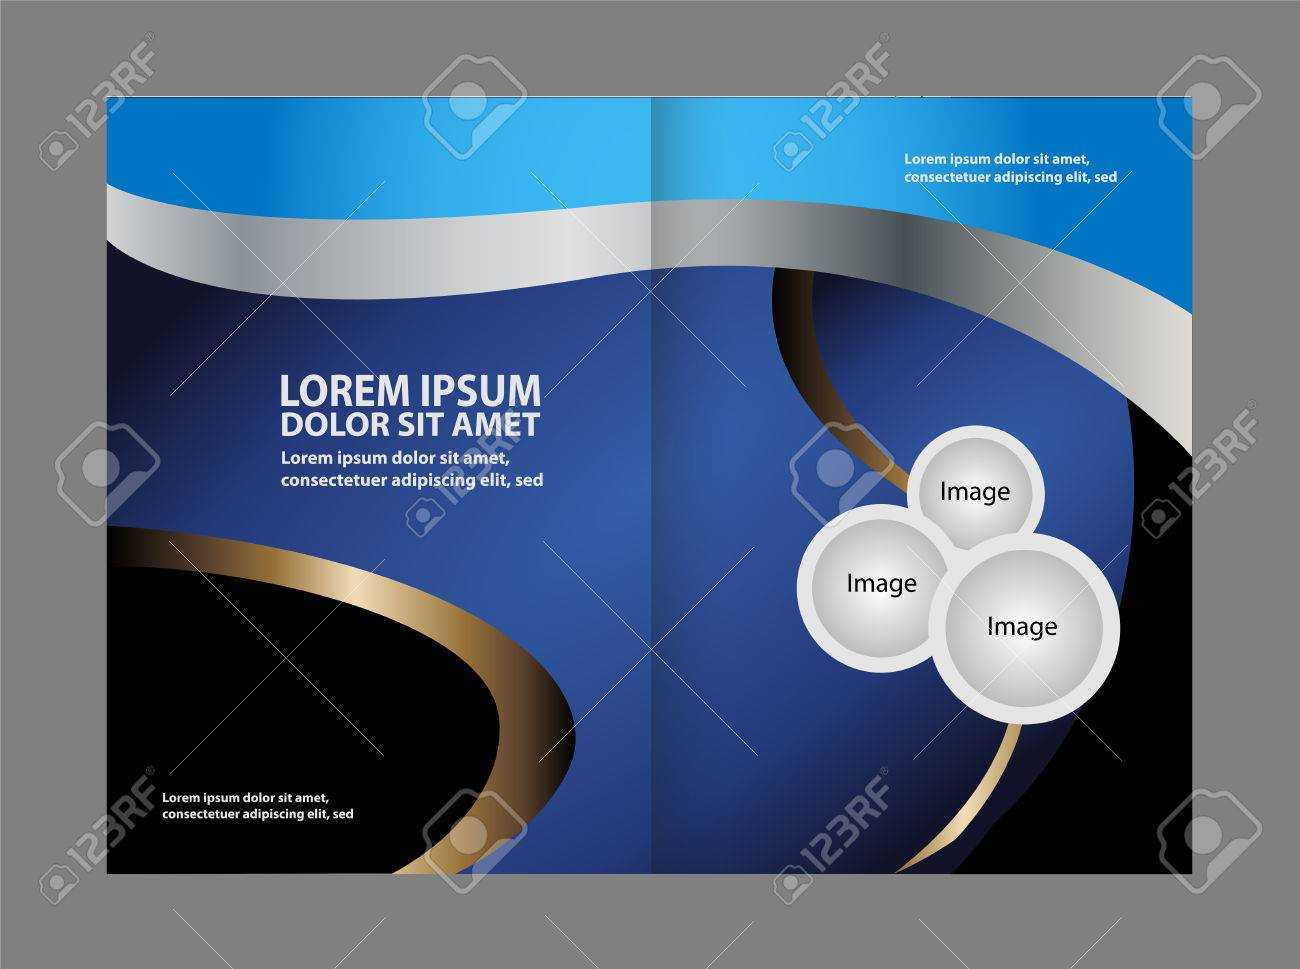 Professional Business Flyer Template Or Corporate Brochure Design For Professional Brochure Design Templates